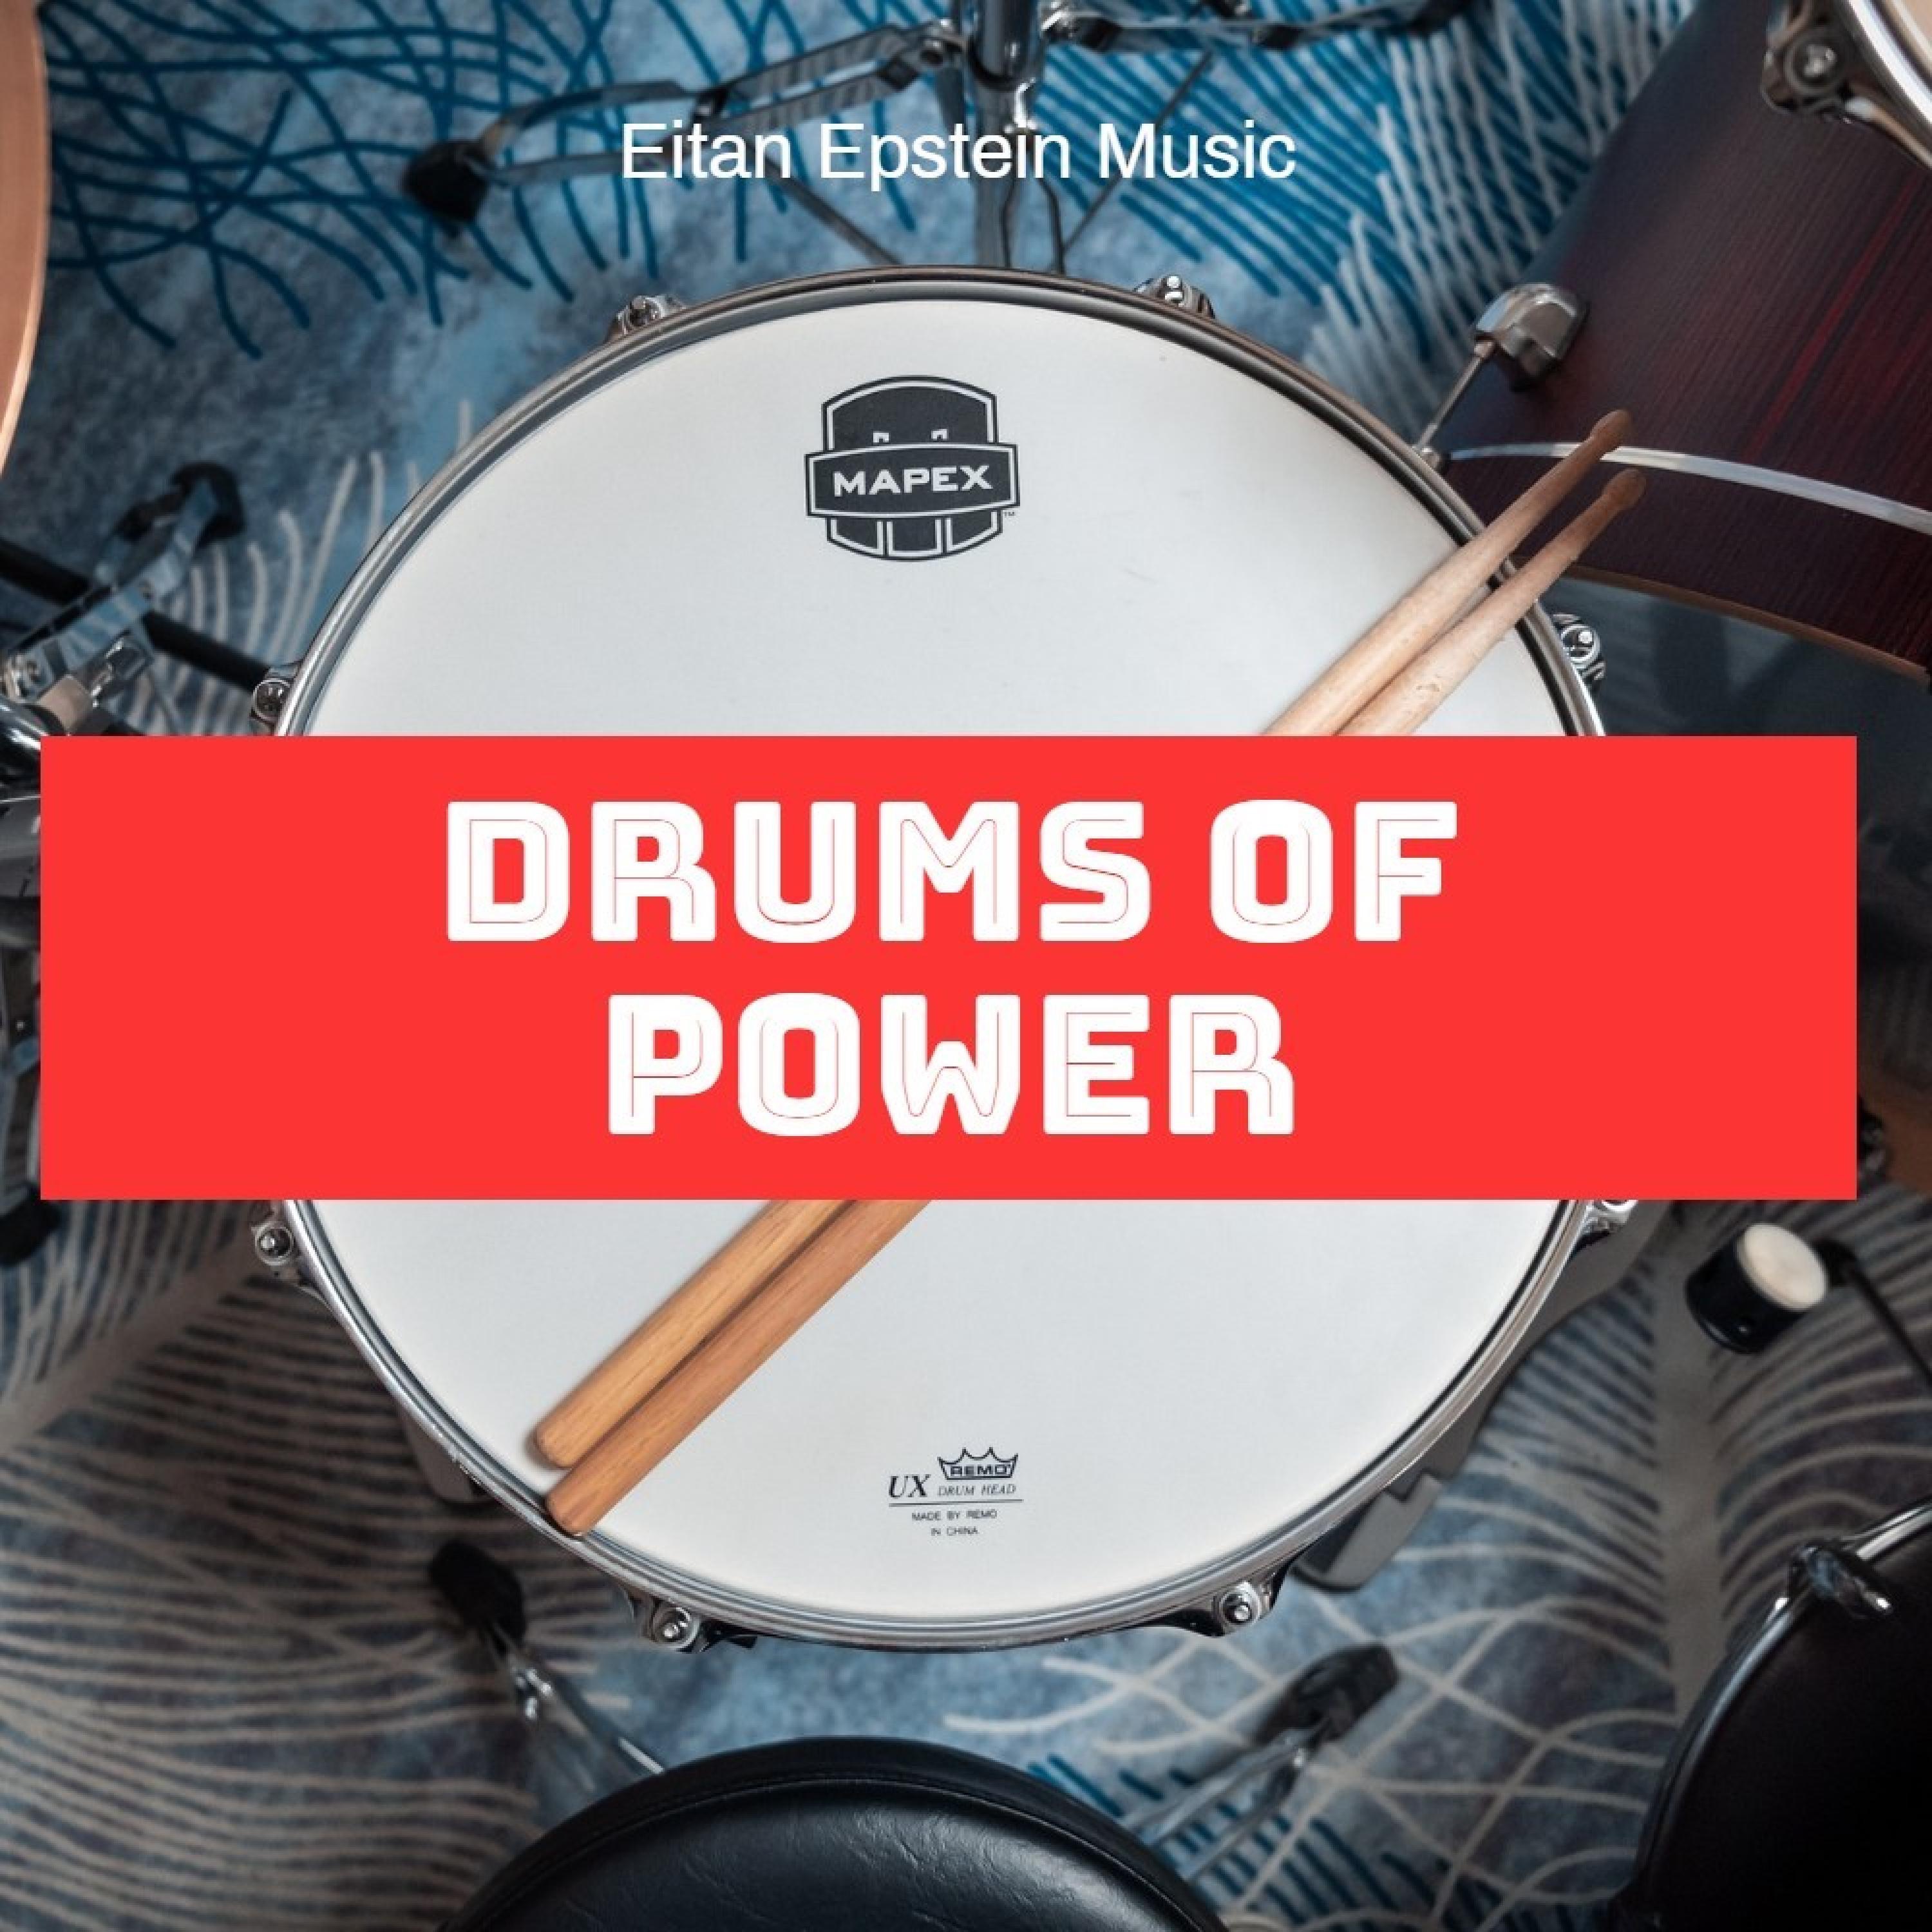 Power drums